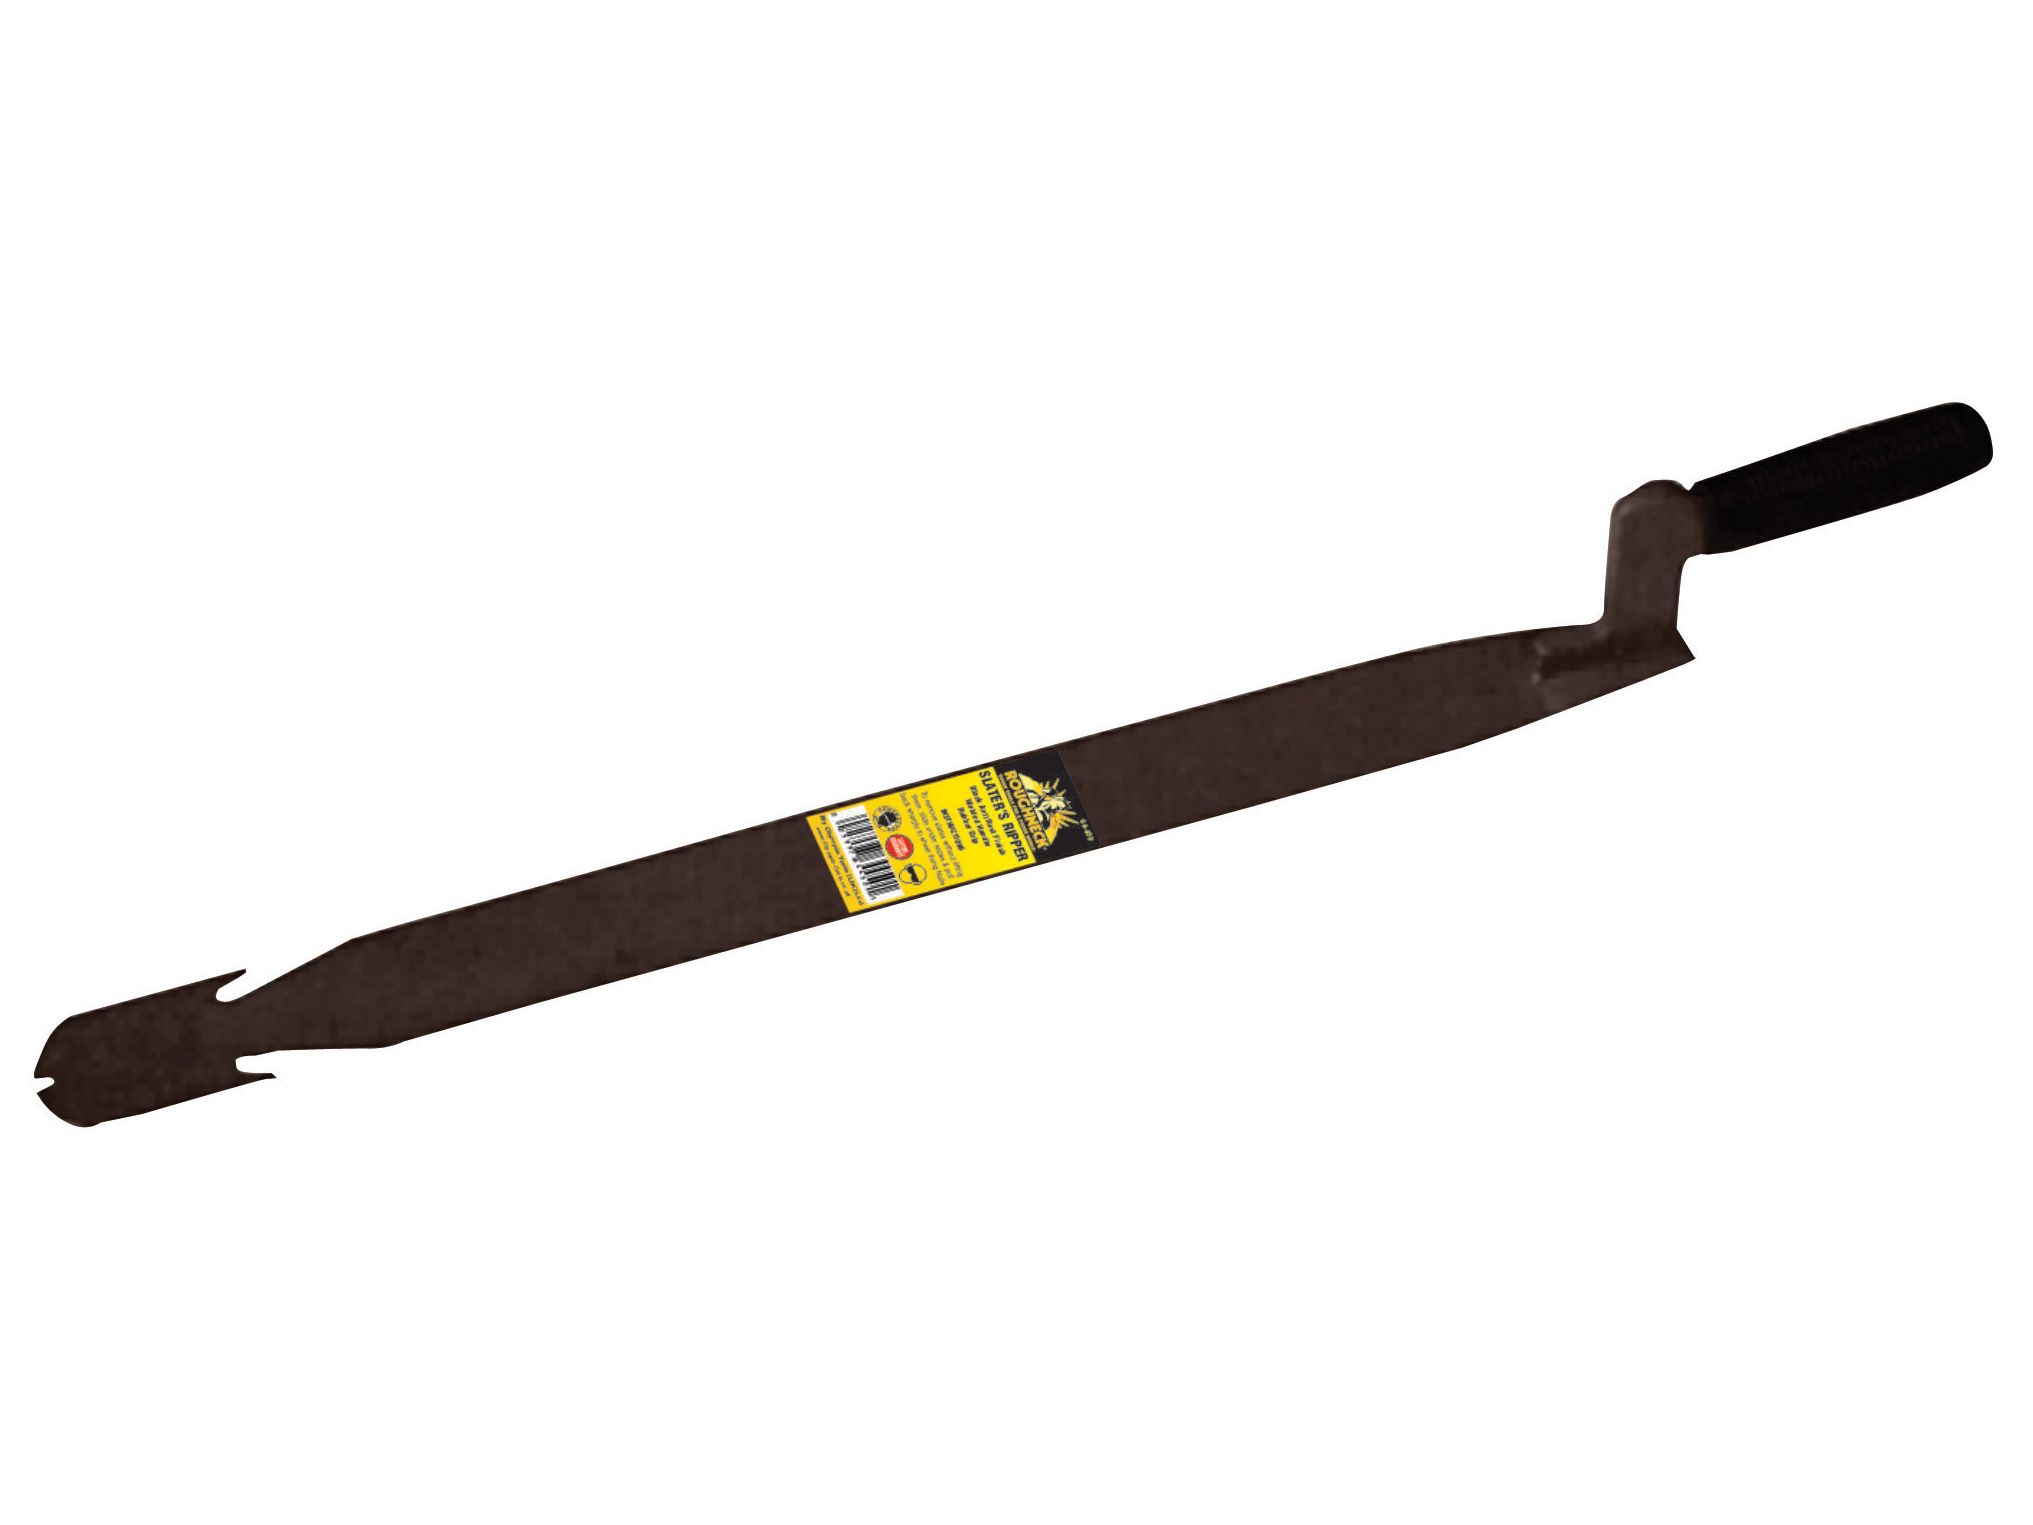 Roughneck Roofing Slates Ripper - 580mm